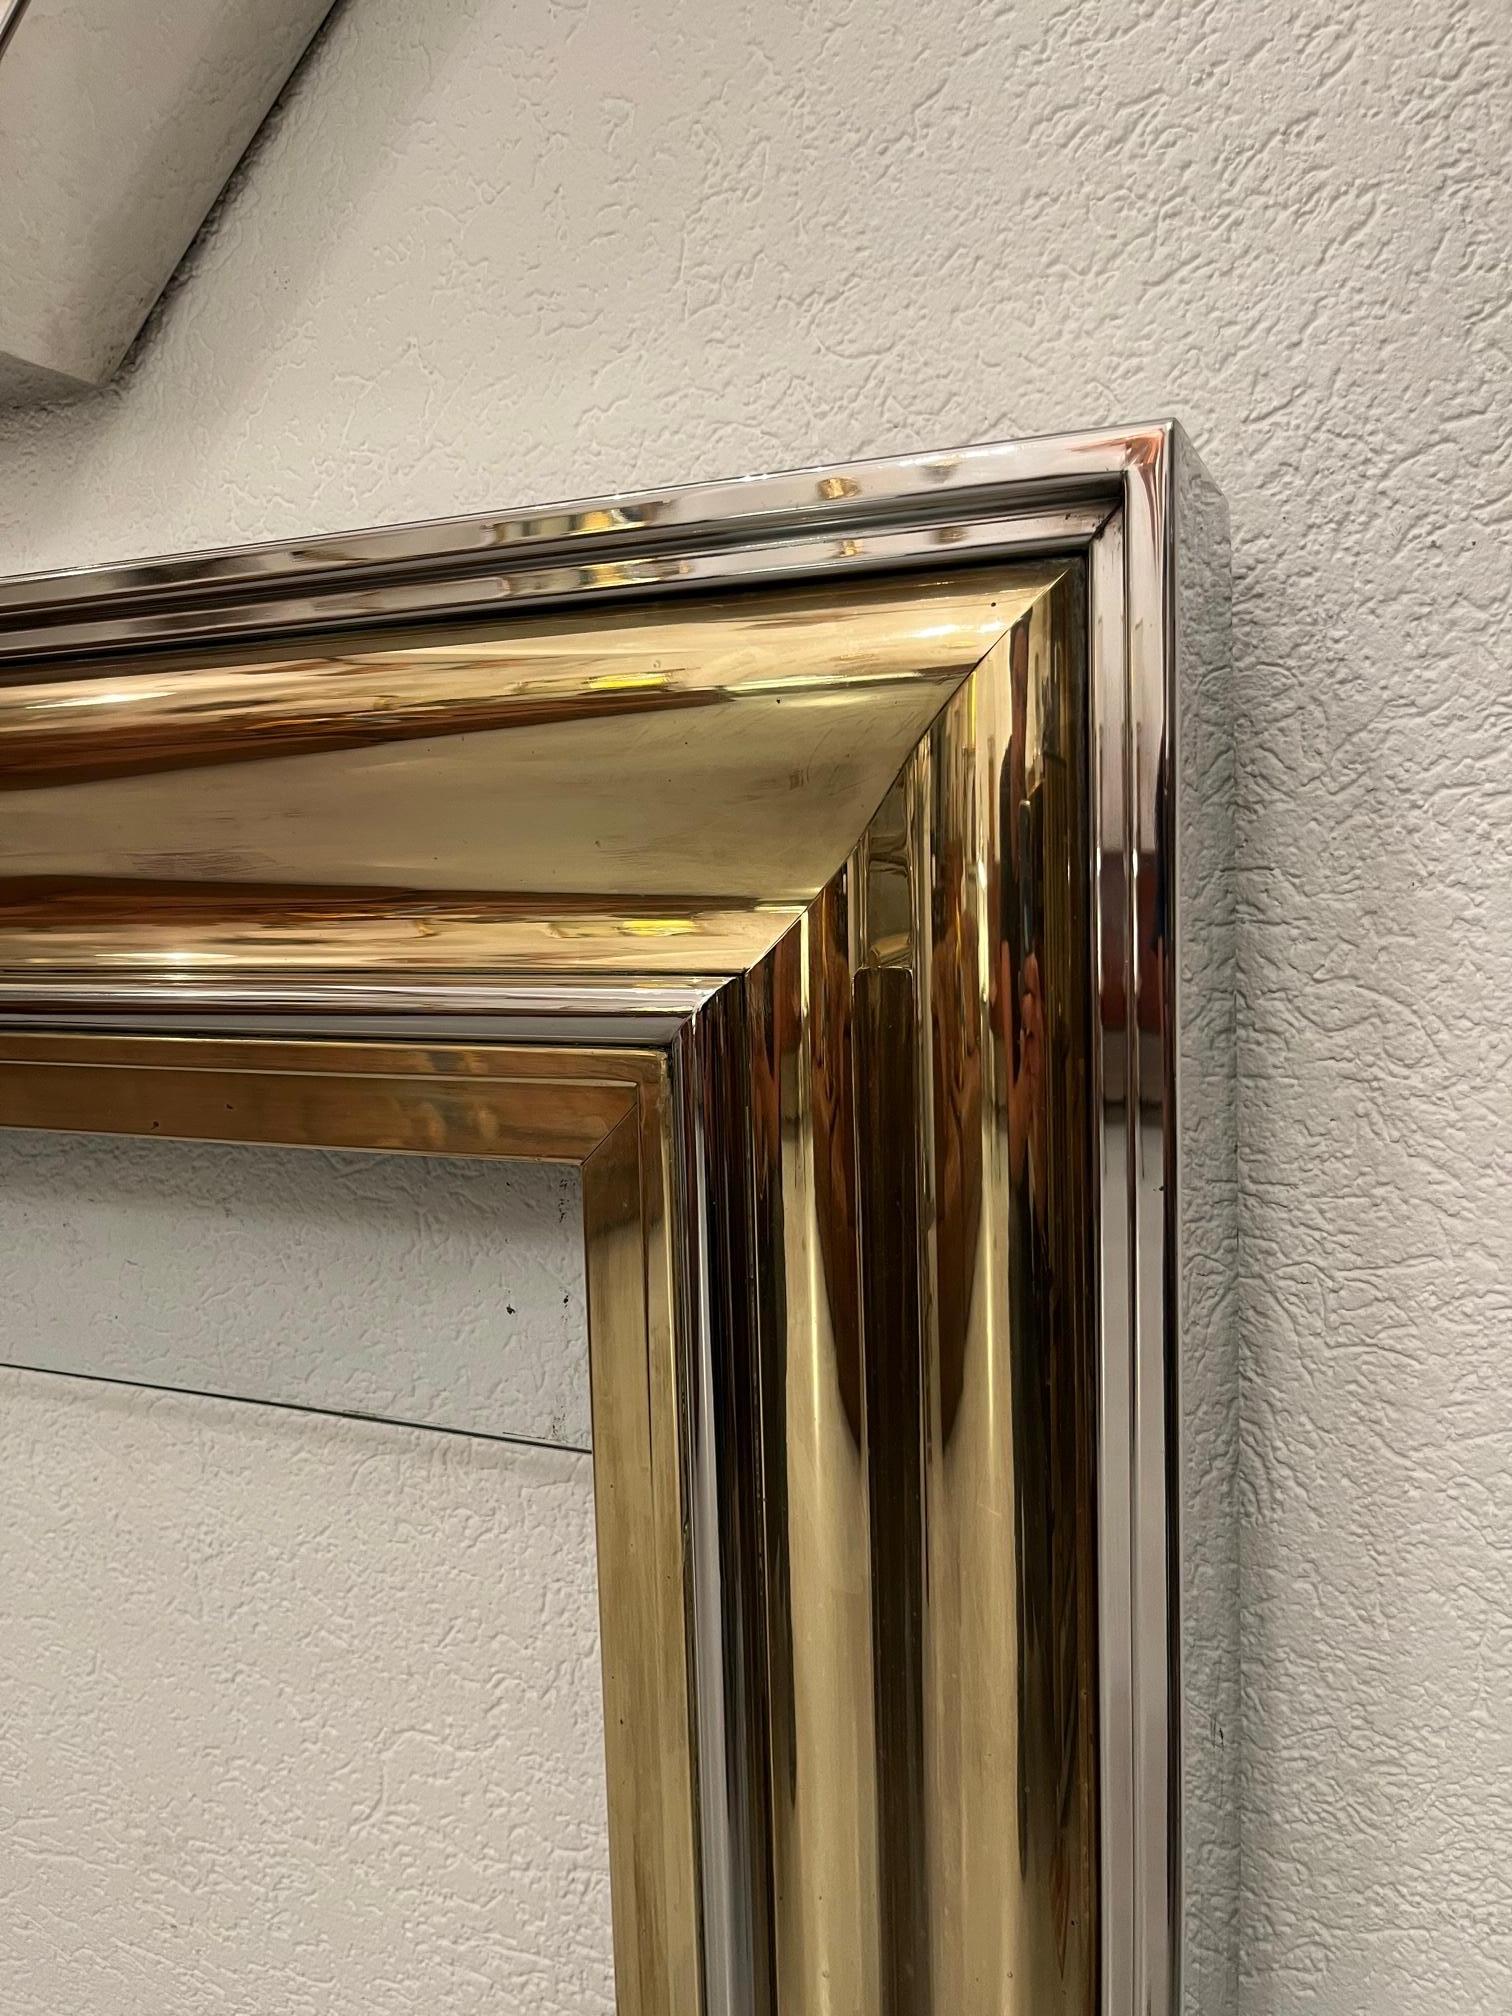 Vintage Chrome & Brass Octagonal Wall Mirror & Fireplace by Sandro Petti, 1970s For Sale 1